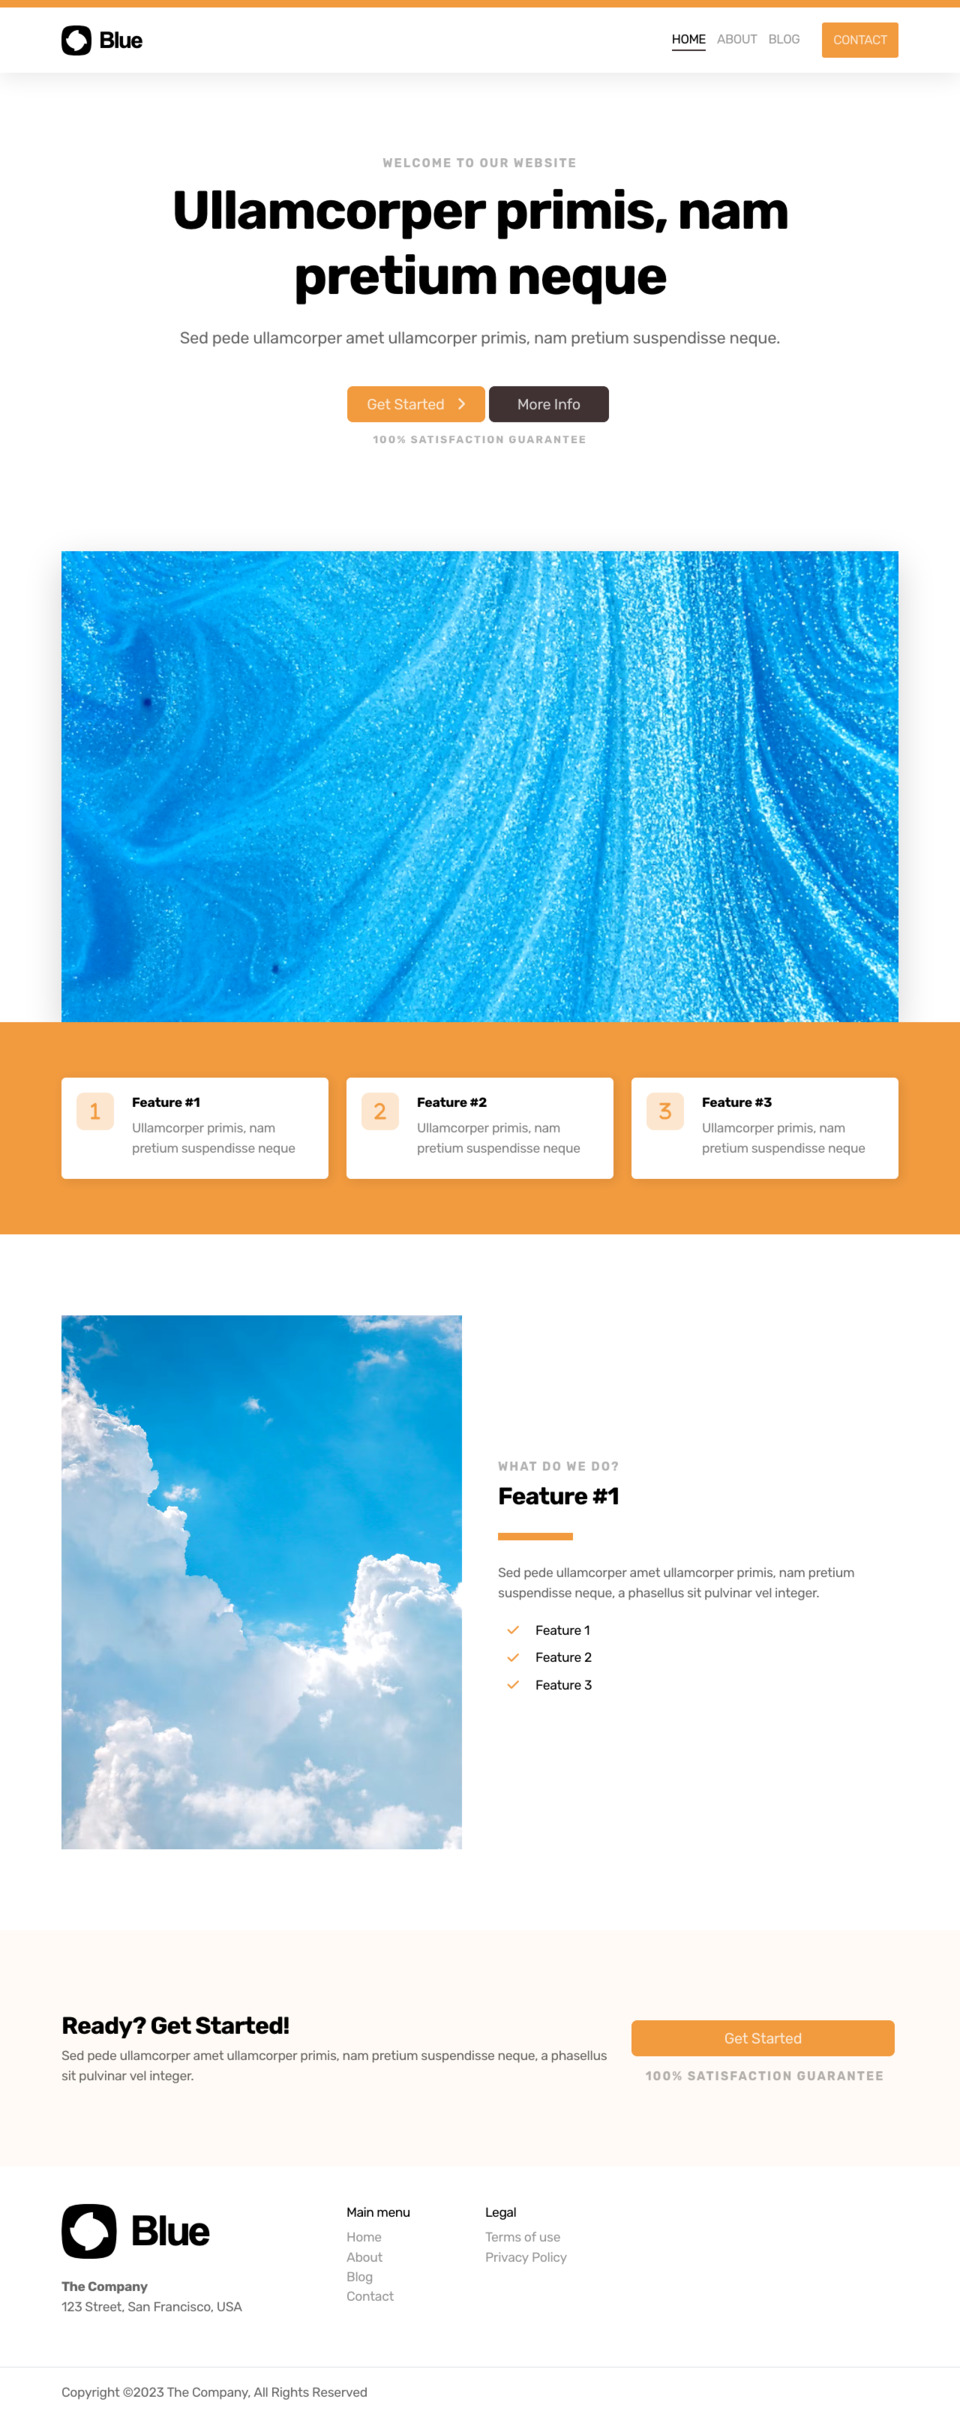 Blue Website Template - Ideal for online businesses, marketing professionals, educators, and anyone looking for a visually appealing and easy-to-manage website.